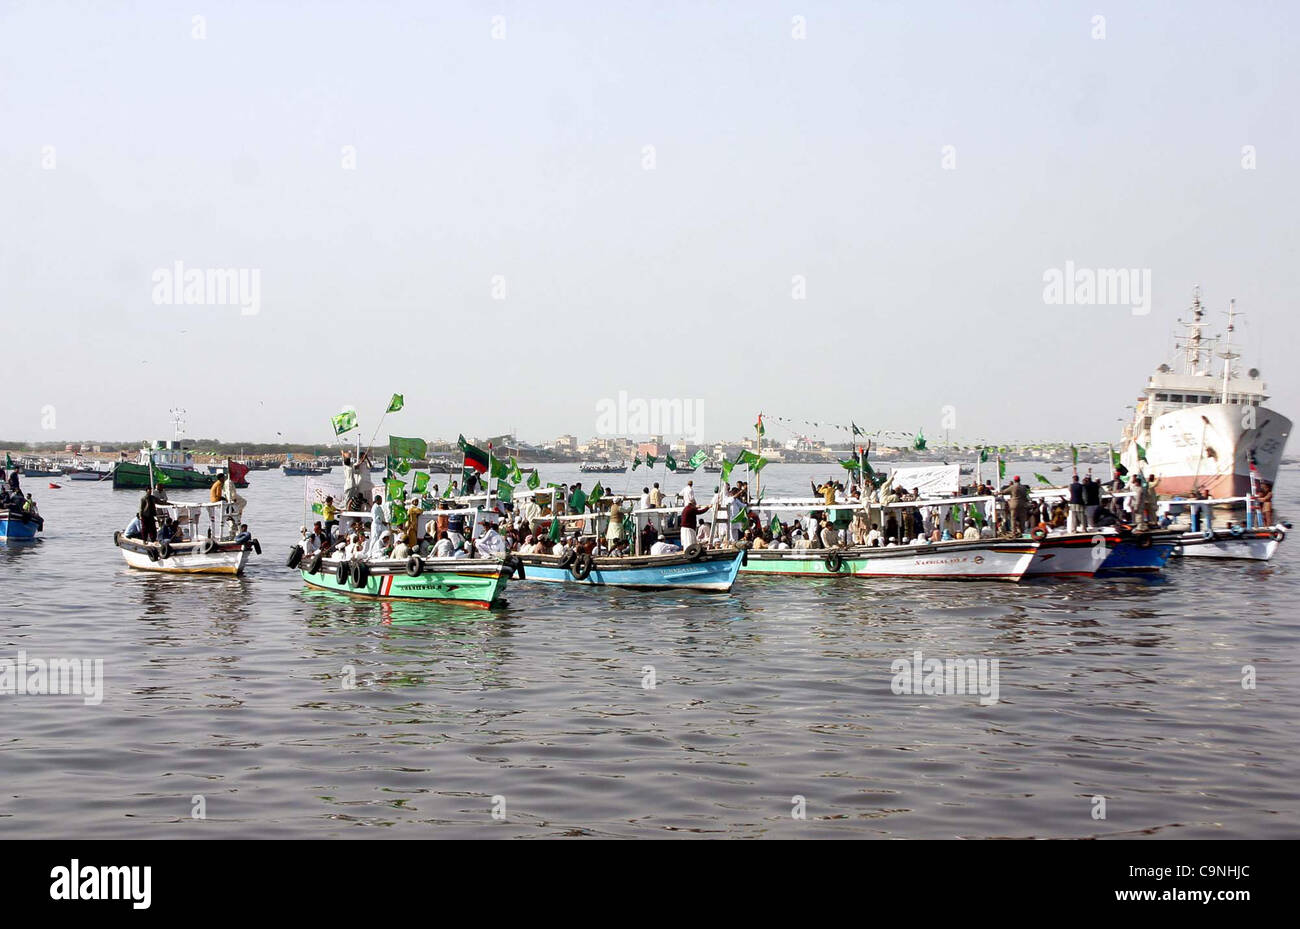 Supporters of Jamat-e-Ahle Sunnat ride on boats during boats rally from Manora to Kemari in the connection of Jashan-e-Eid Milad-un-Nabi (SAW) in Arabian Sea in Karachi on Wednesday, February 01, 2012. Stock Photo